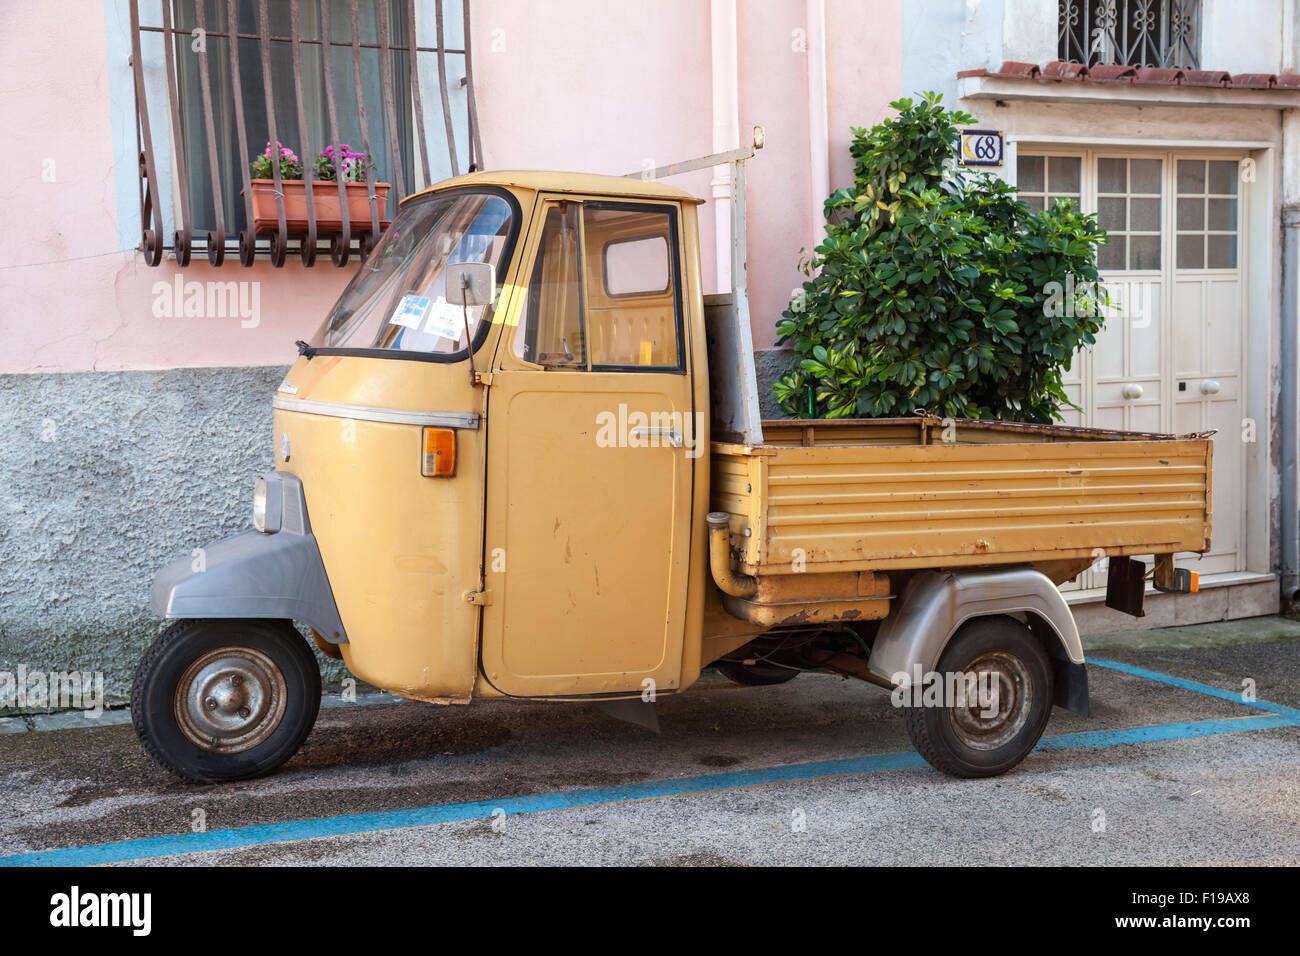 Gaeta, Italy - August 19, 2015: P 501 Ape Car is a three-wheeled light commercial vehicle produced since 1948 by Piaggio Stock Photo